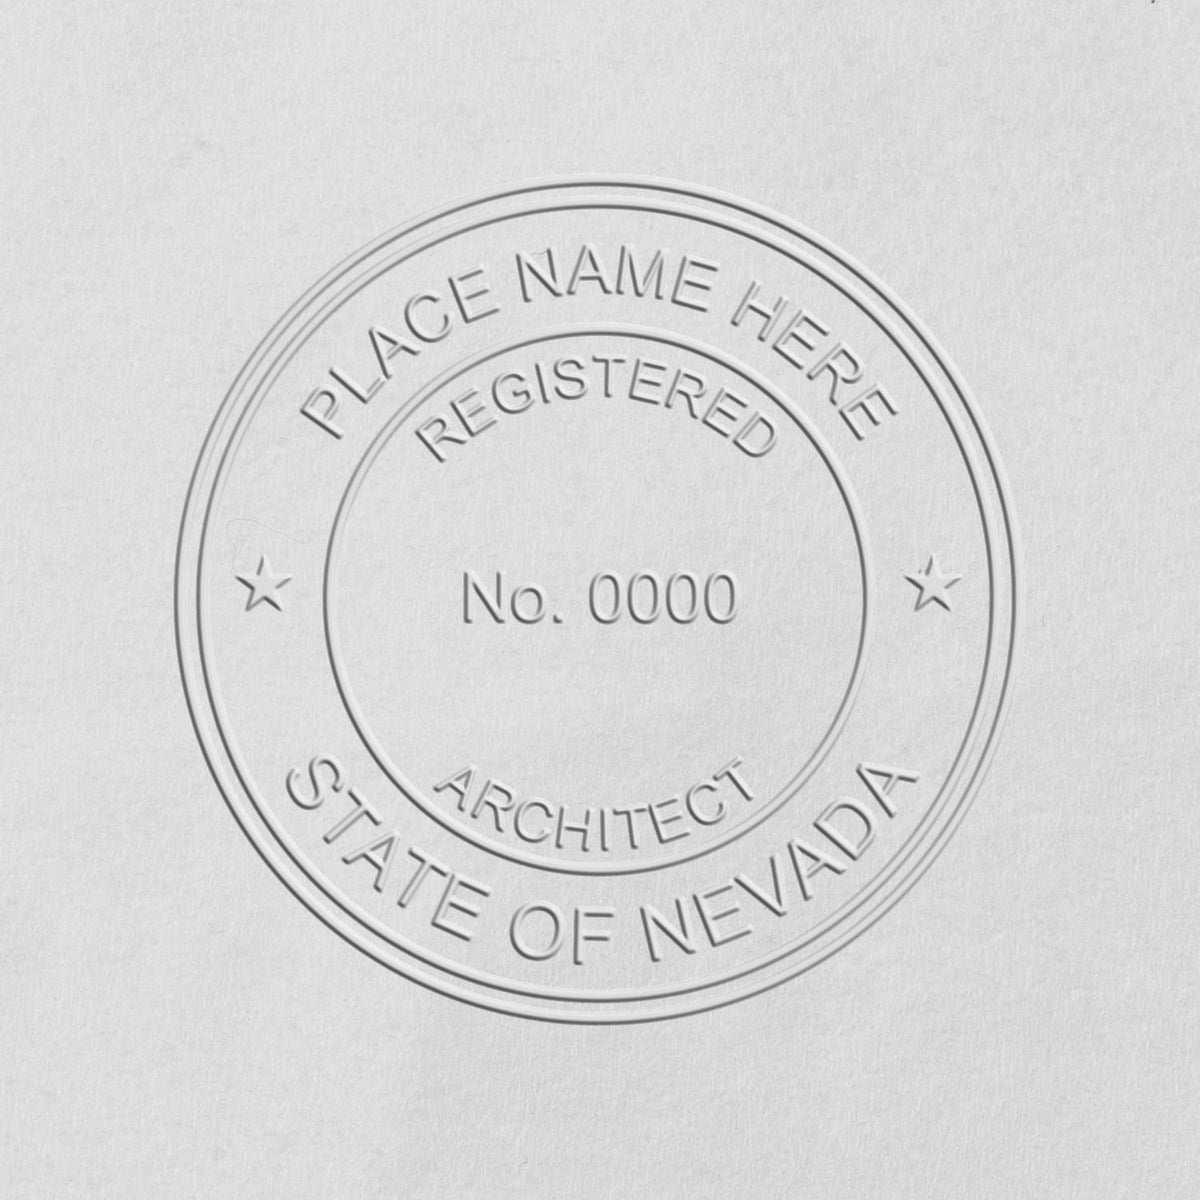 Another Example of a stamped impression of the Heavy Duty Cast Iron Nevada Architect Embosser on a piece of office paper.